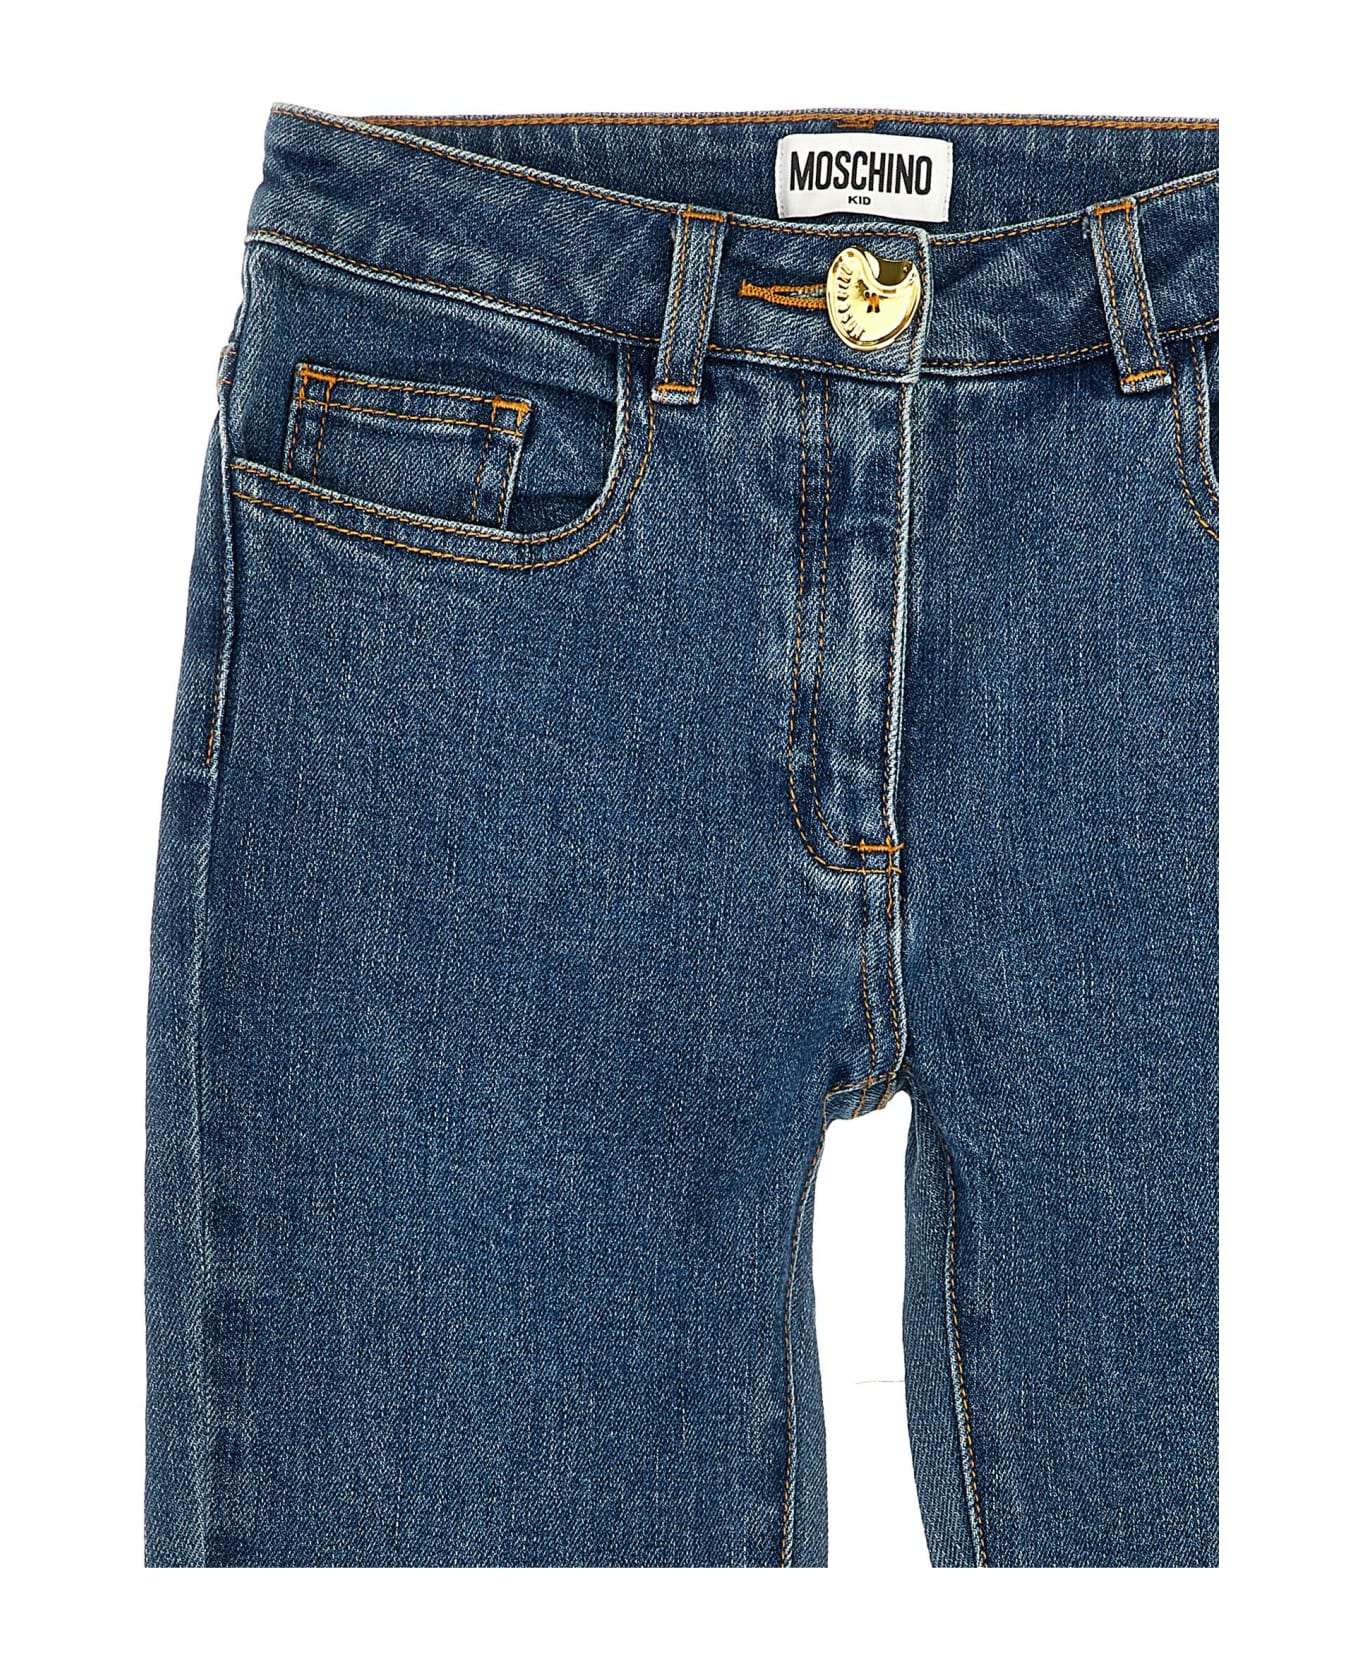 Moschino Button Detail Jeans - Blue